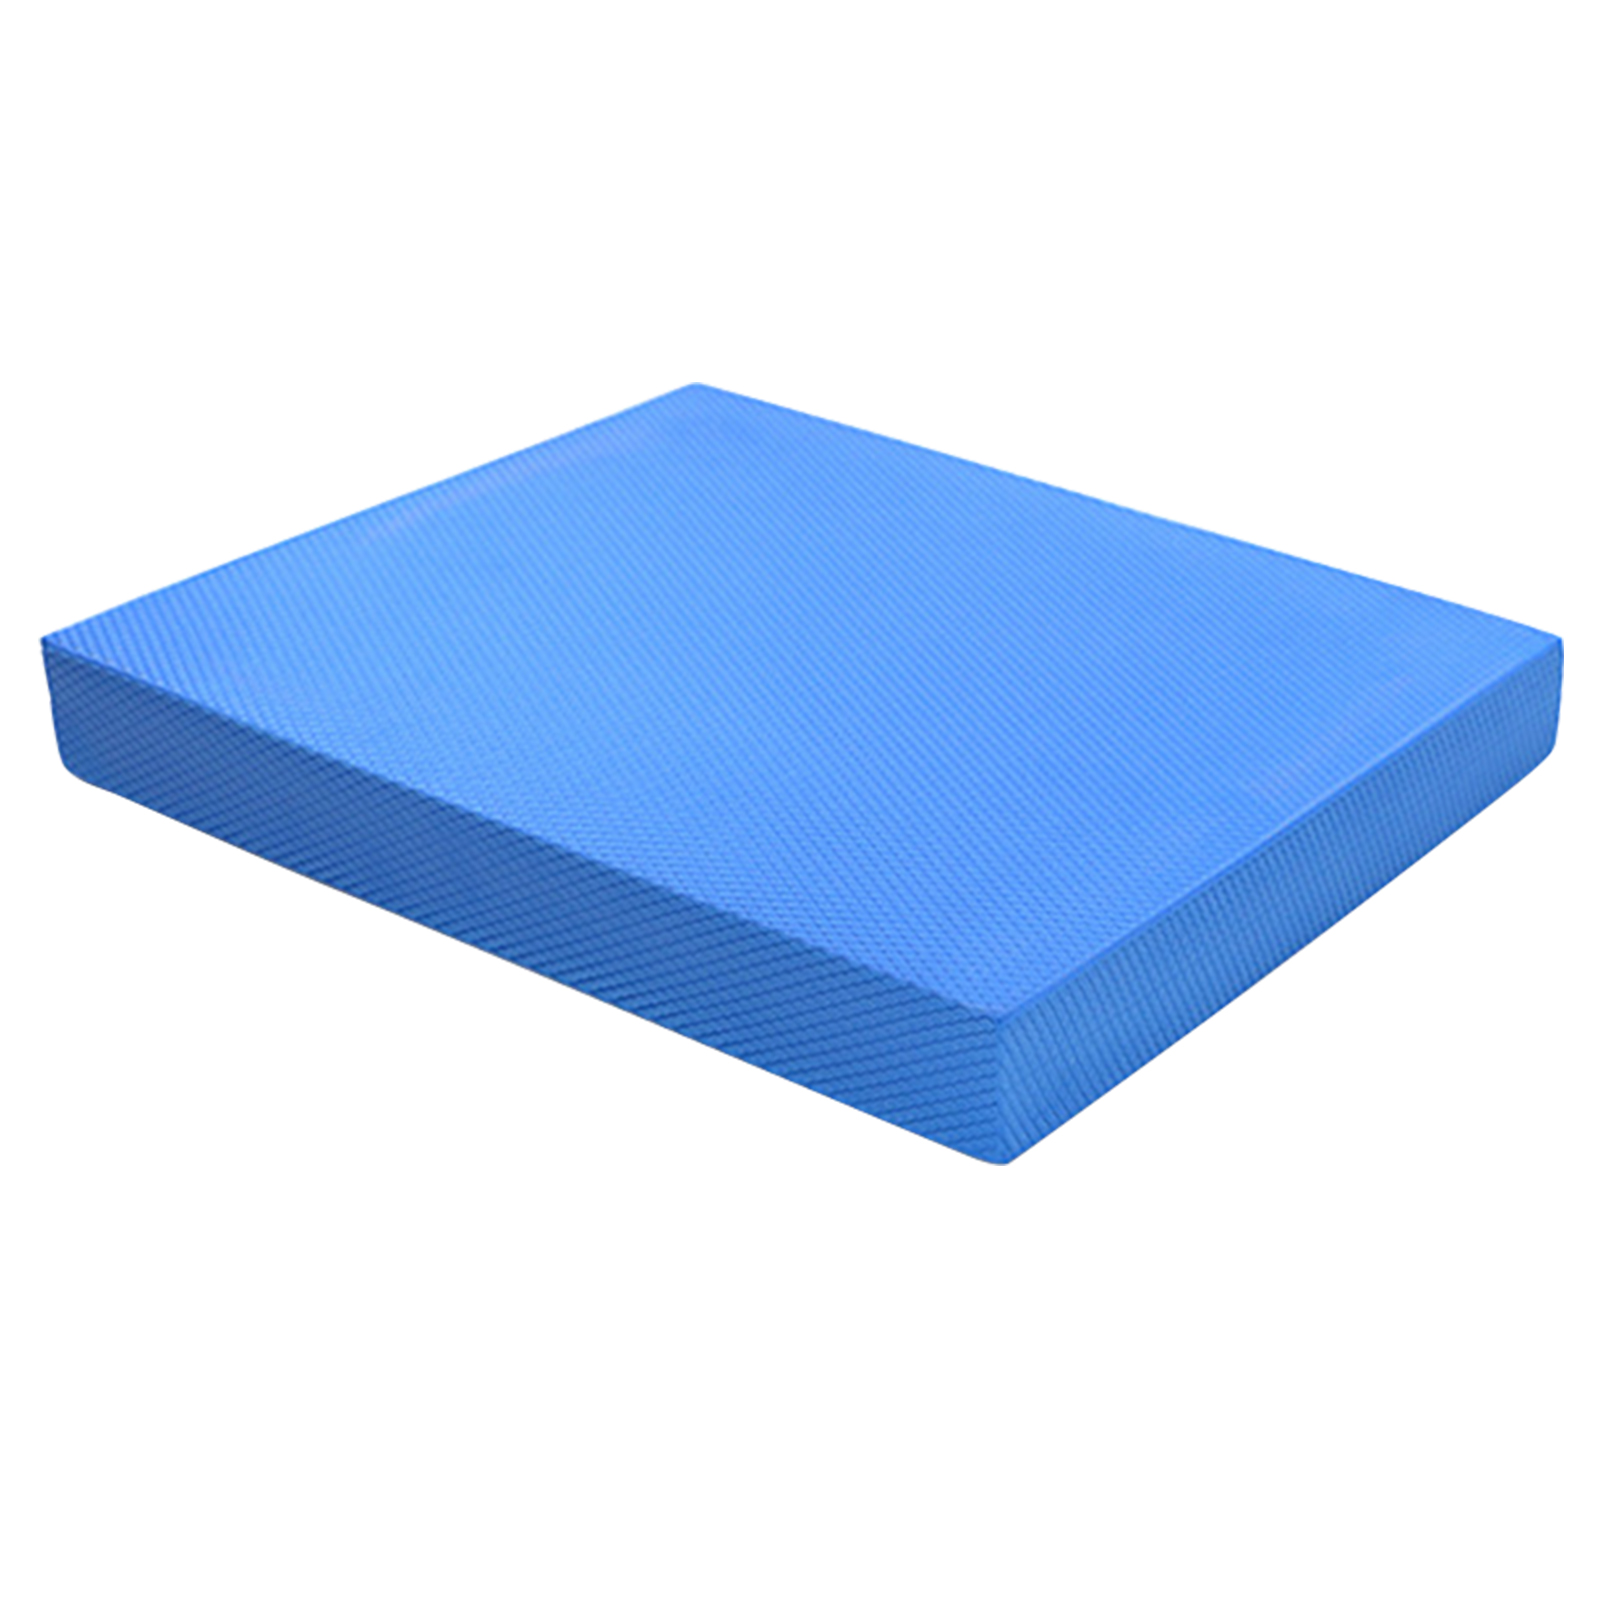 Yoga For Physical Therapy Soft TPE Exercise Mat Rehabilitation Adults Kids Knee Stability Workout Ankle Balance Foam Pad Travel